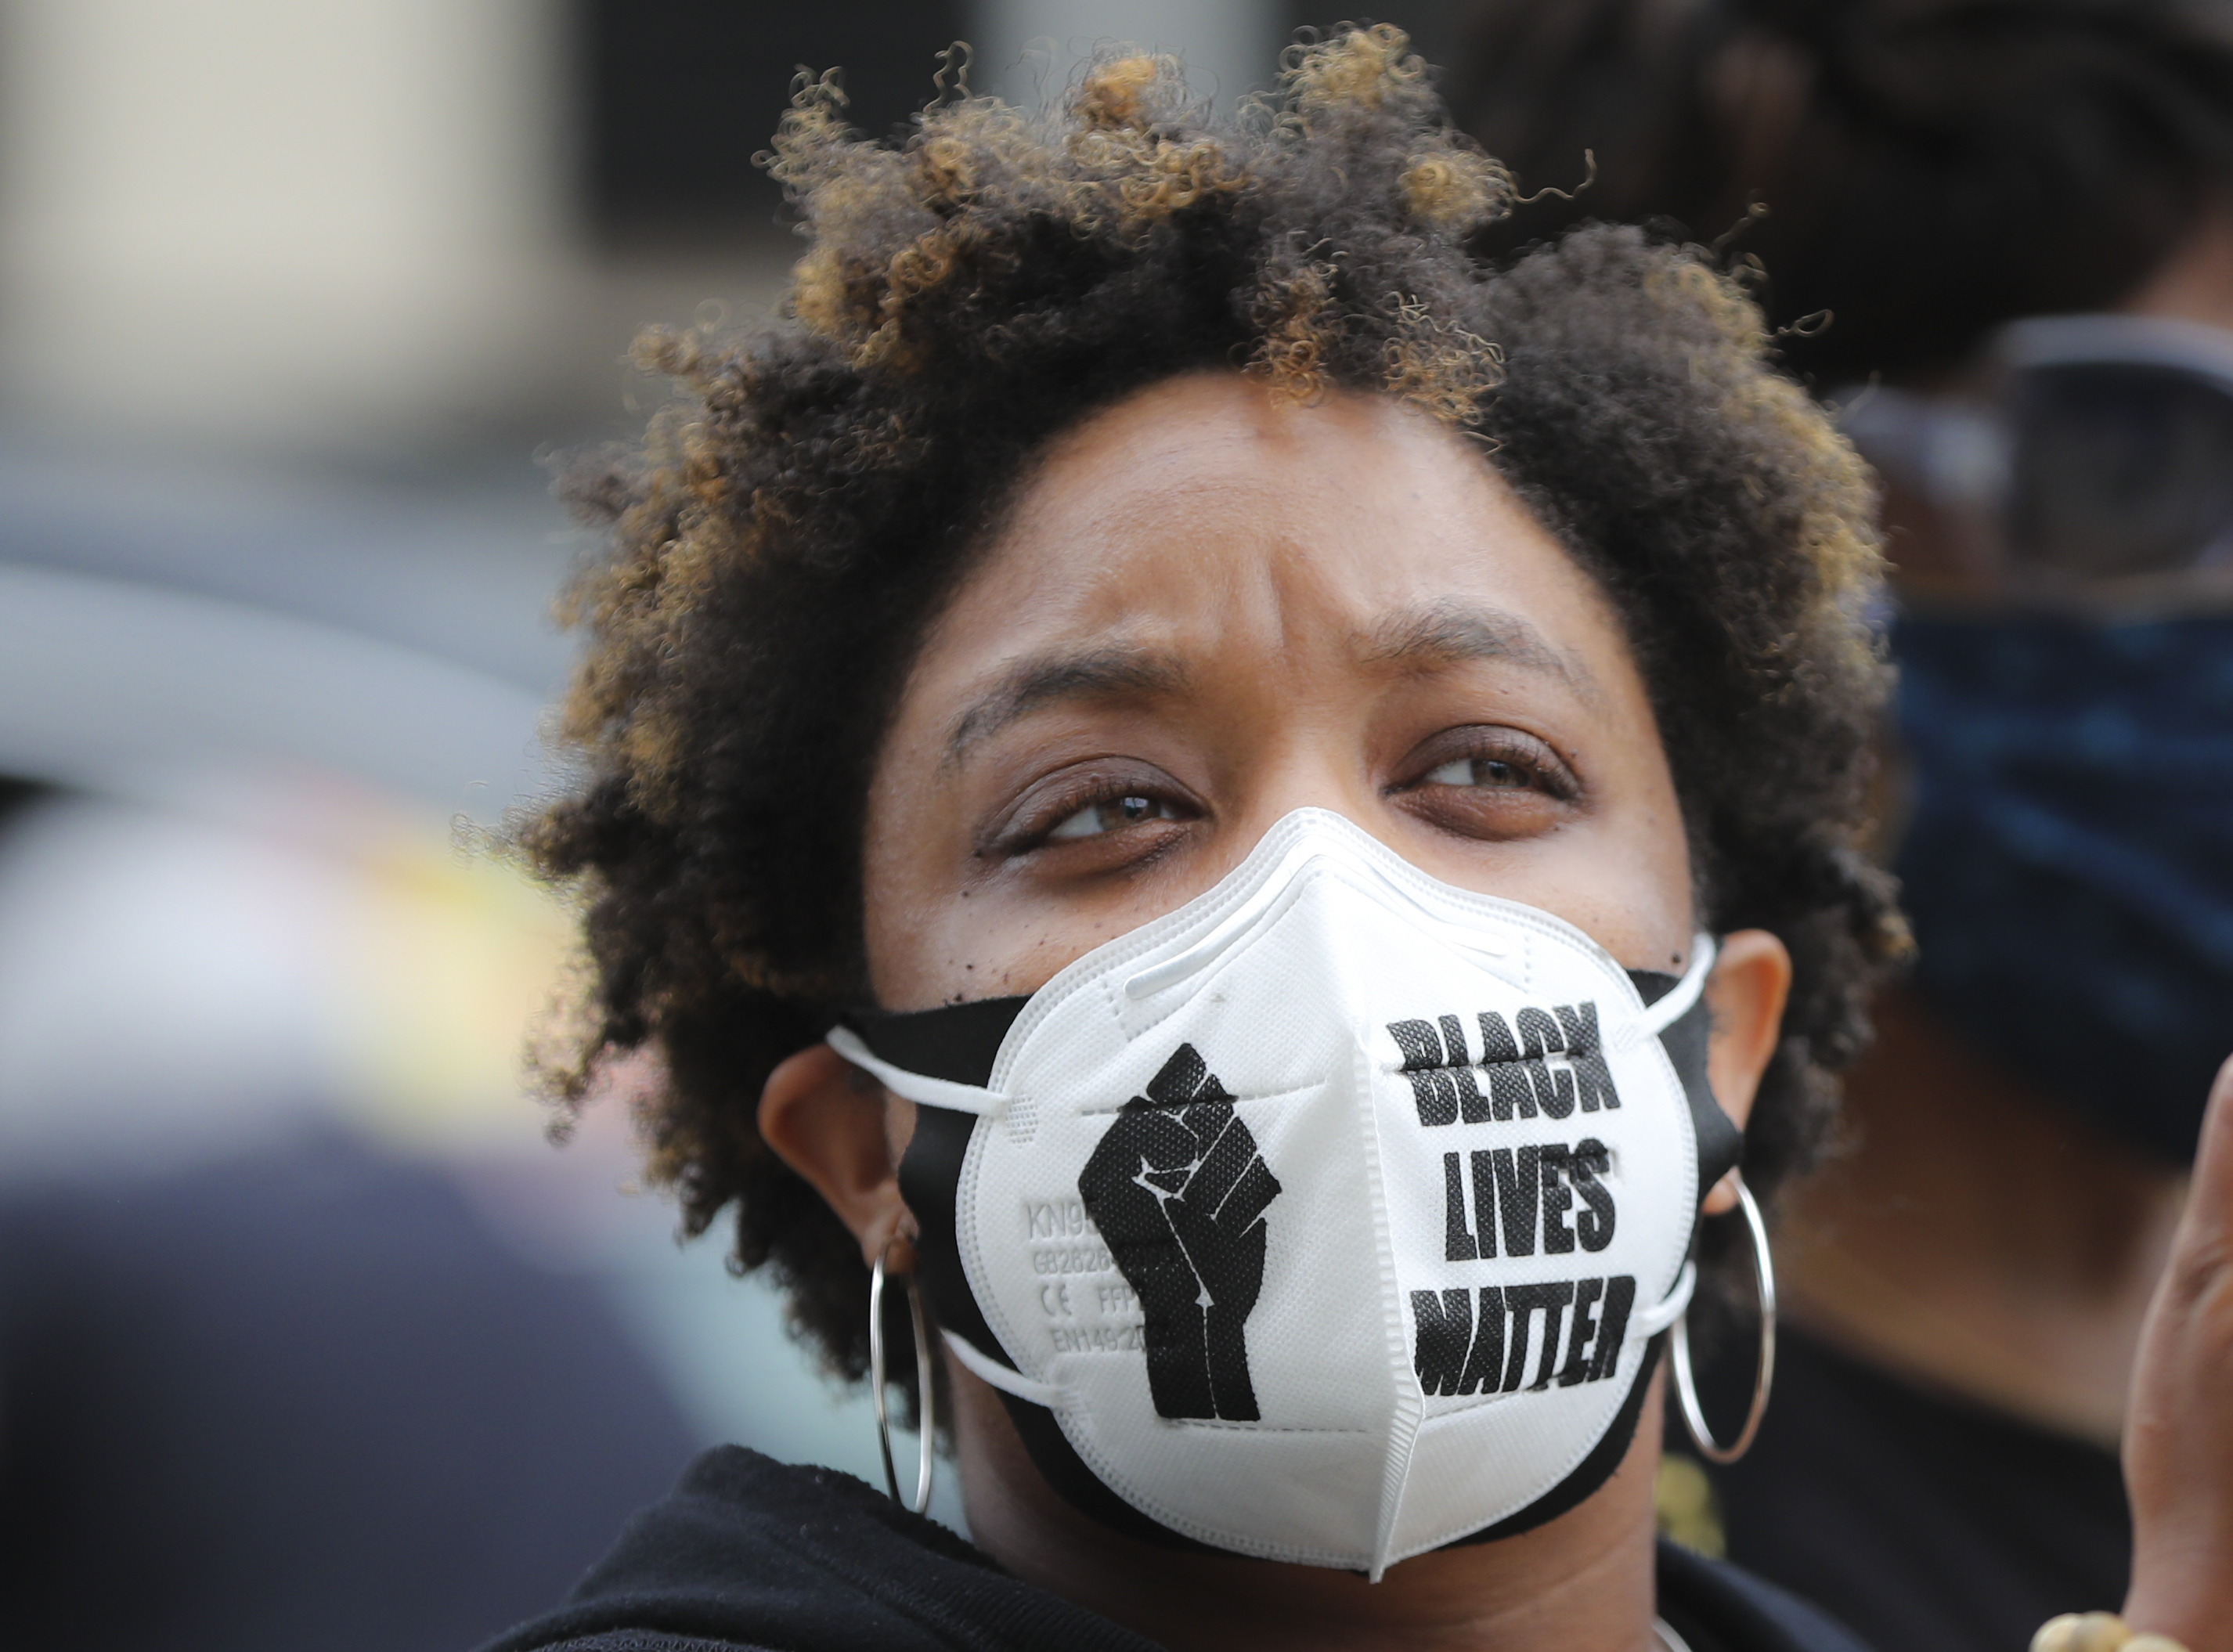 A Black person wearing a face mask that reads “Black lives matter.”